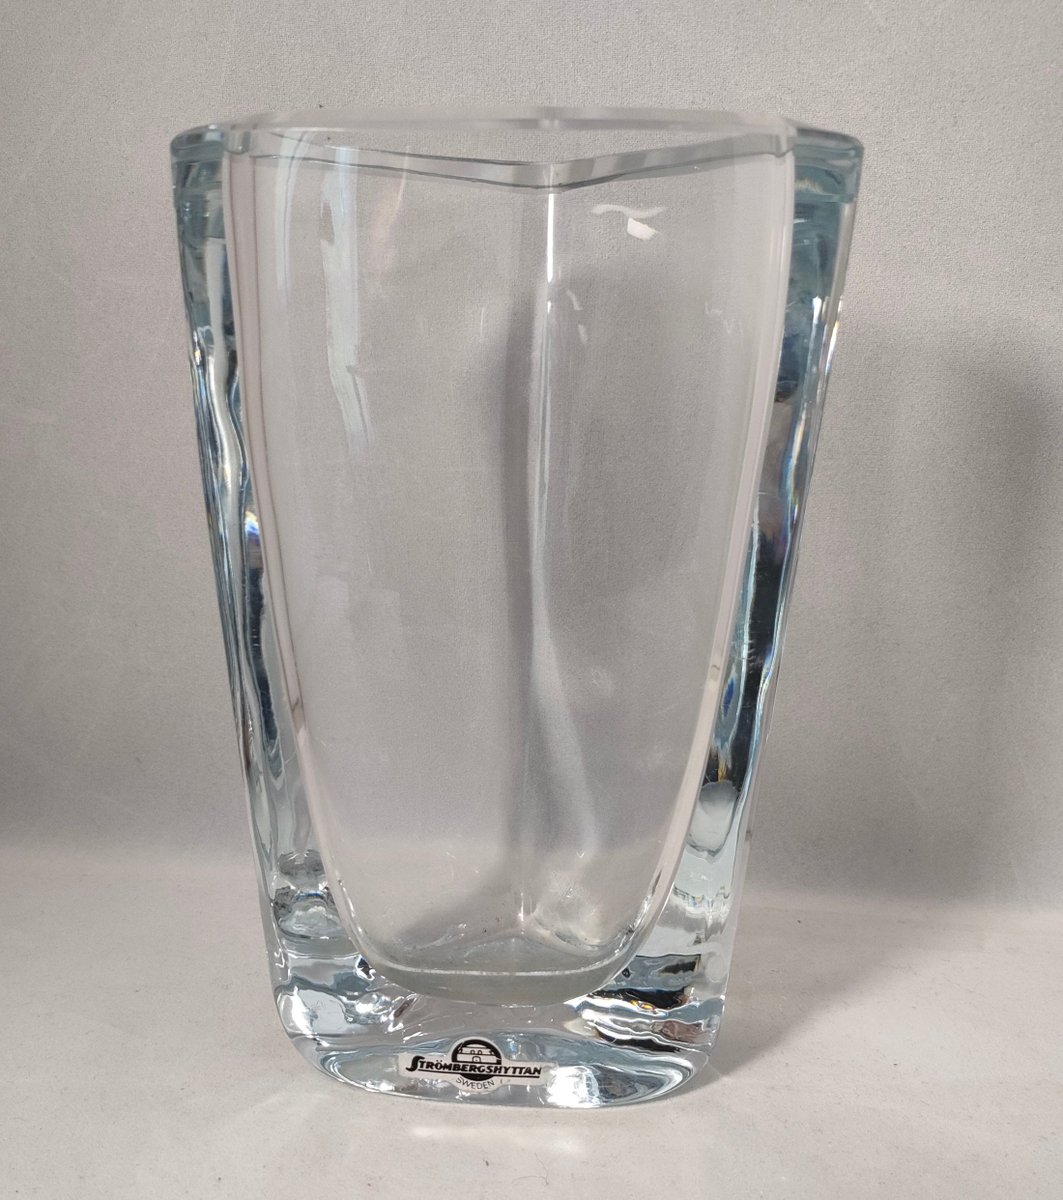 Excited to share the latest addition to my #etsy shop: Vintage Strombergshyttan Swedish Tricorn Glass Vase - Signed and Numbered etsy.me/3CcxjbD #strombergshyttan #swedishglass #collectableglass #glassvase #glass #silverdragonfinds